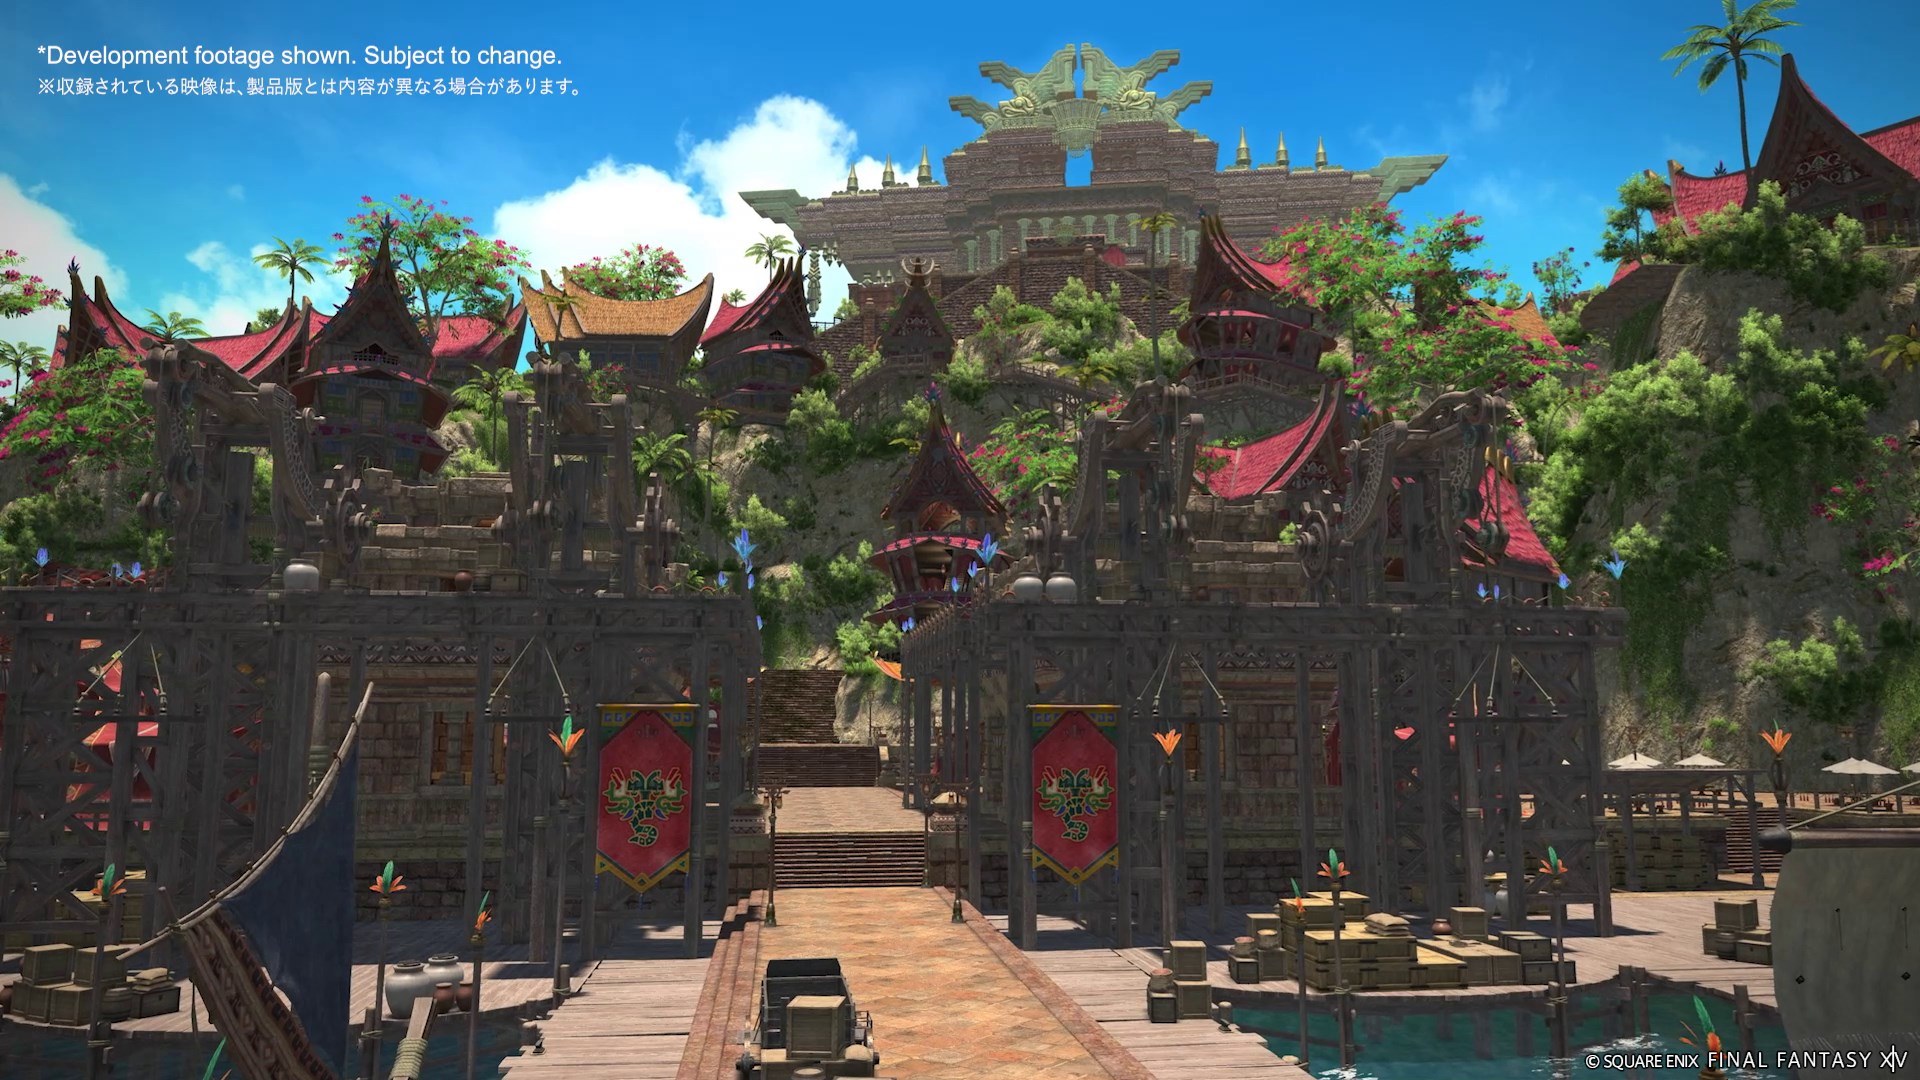 FINAL FANTASY XIV Dawntrail from SQUARE ENIX - New Player Town - Tuliyollal